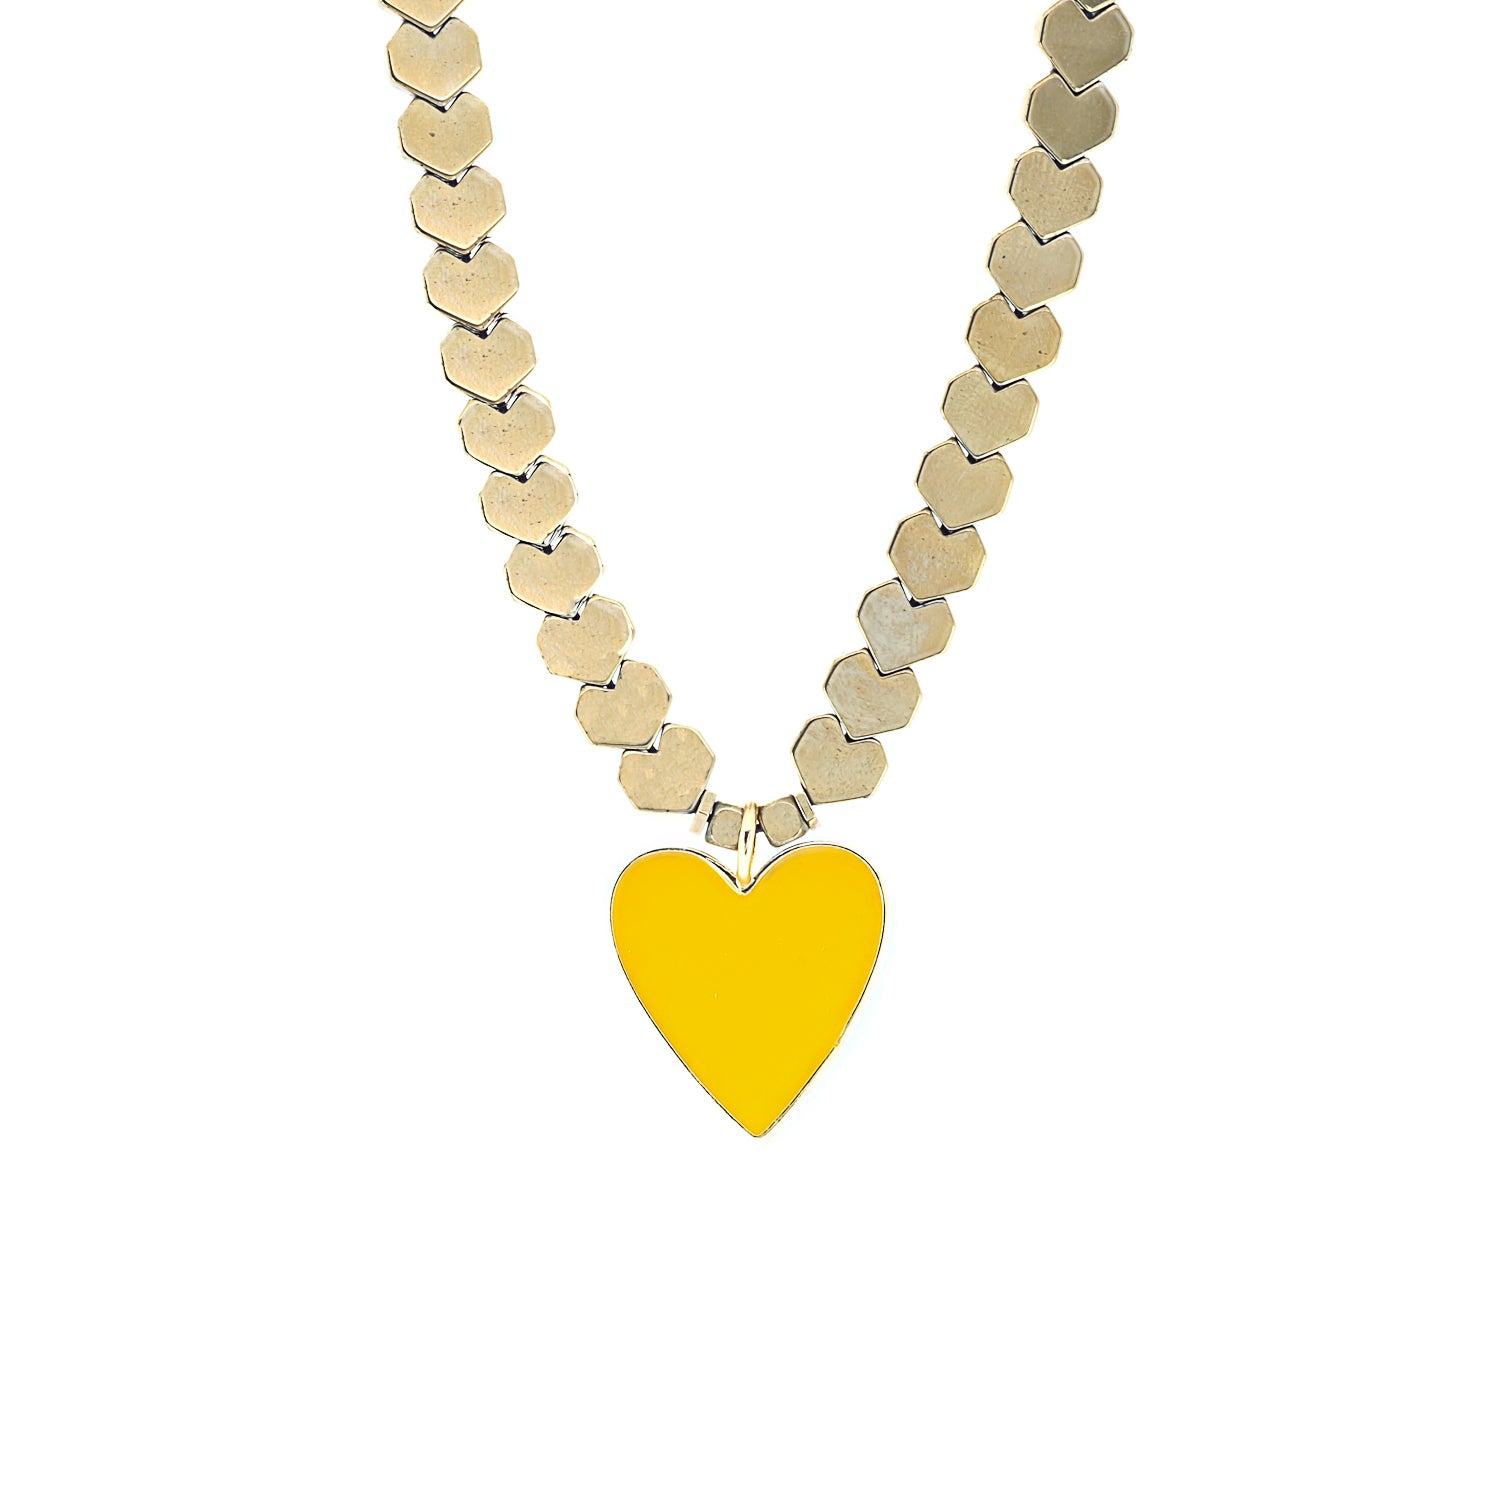 Heart-Shaped Hematite Beads - Gold-colored beads radiating strength and warmth.